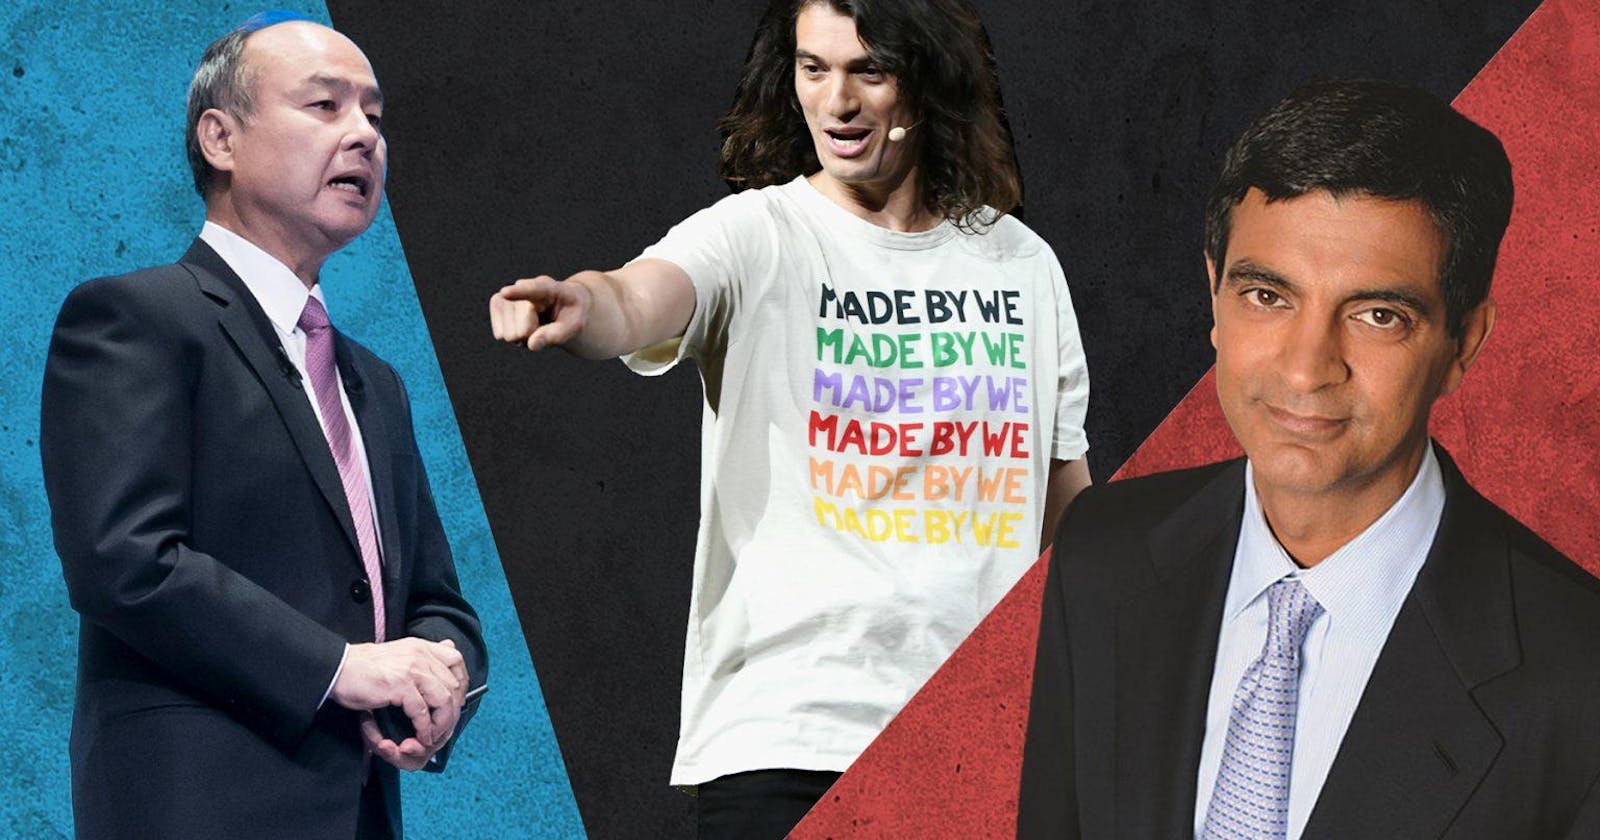 WeWork And Adam Neumann: Scam or Genius? 5 Lessons Learned From Their Rise and Fall